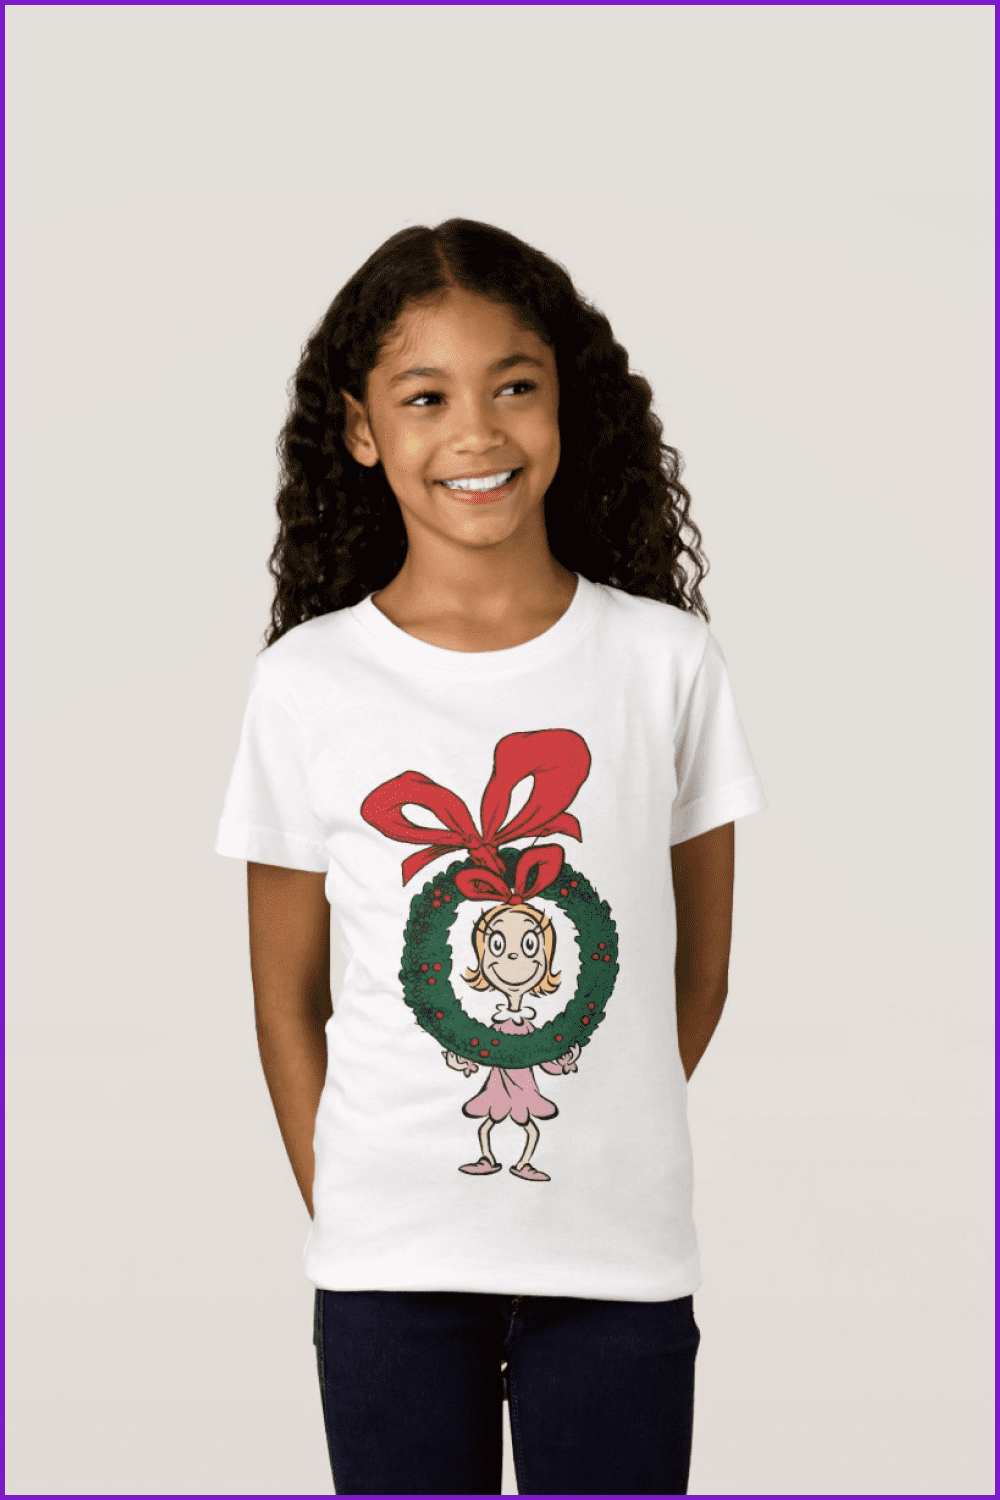 Girl in the white t-shirt with Cindy-Lou.